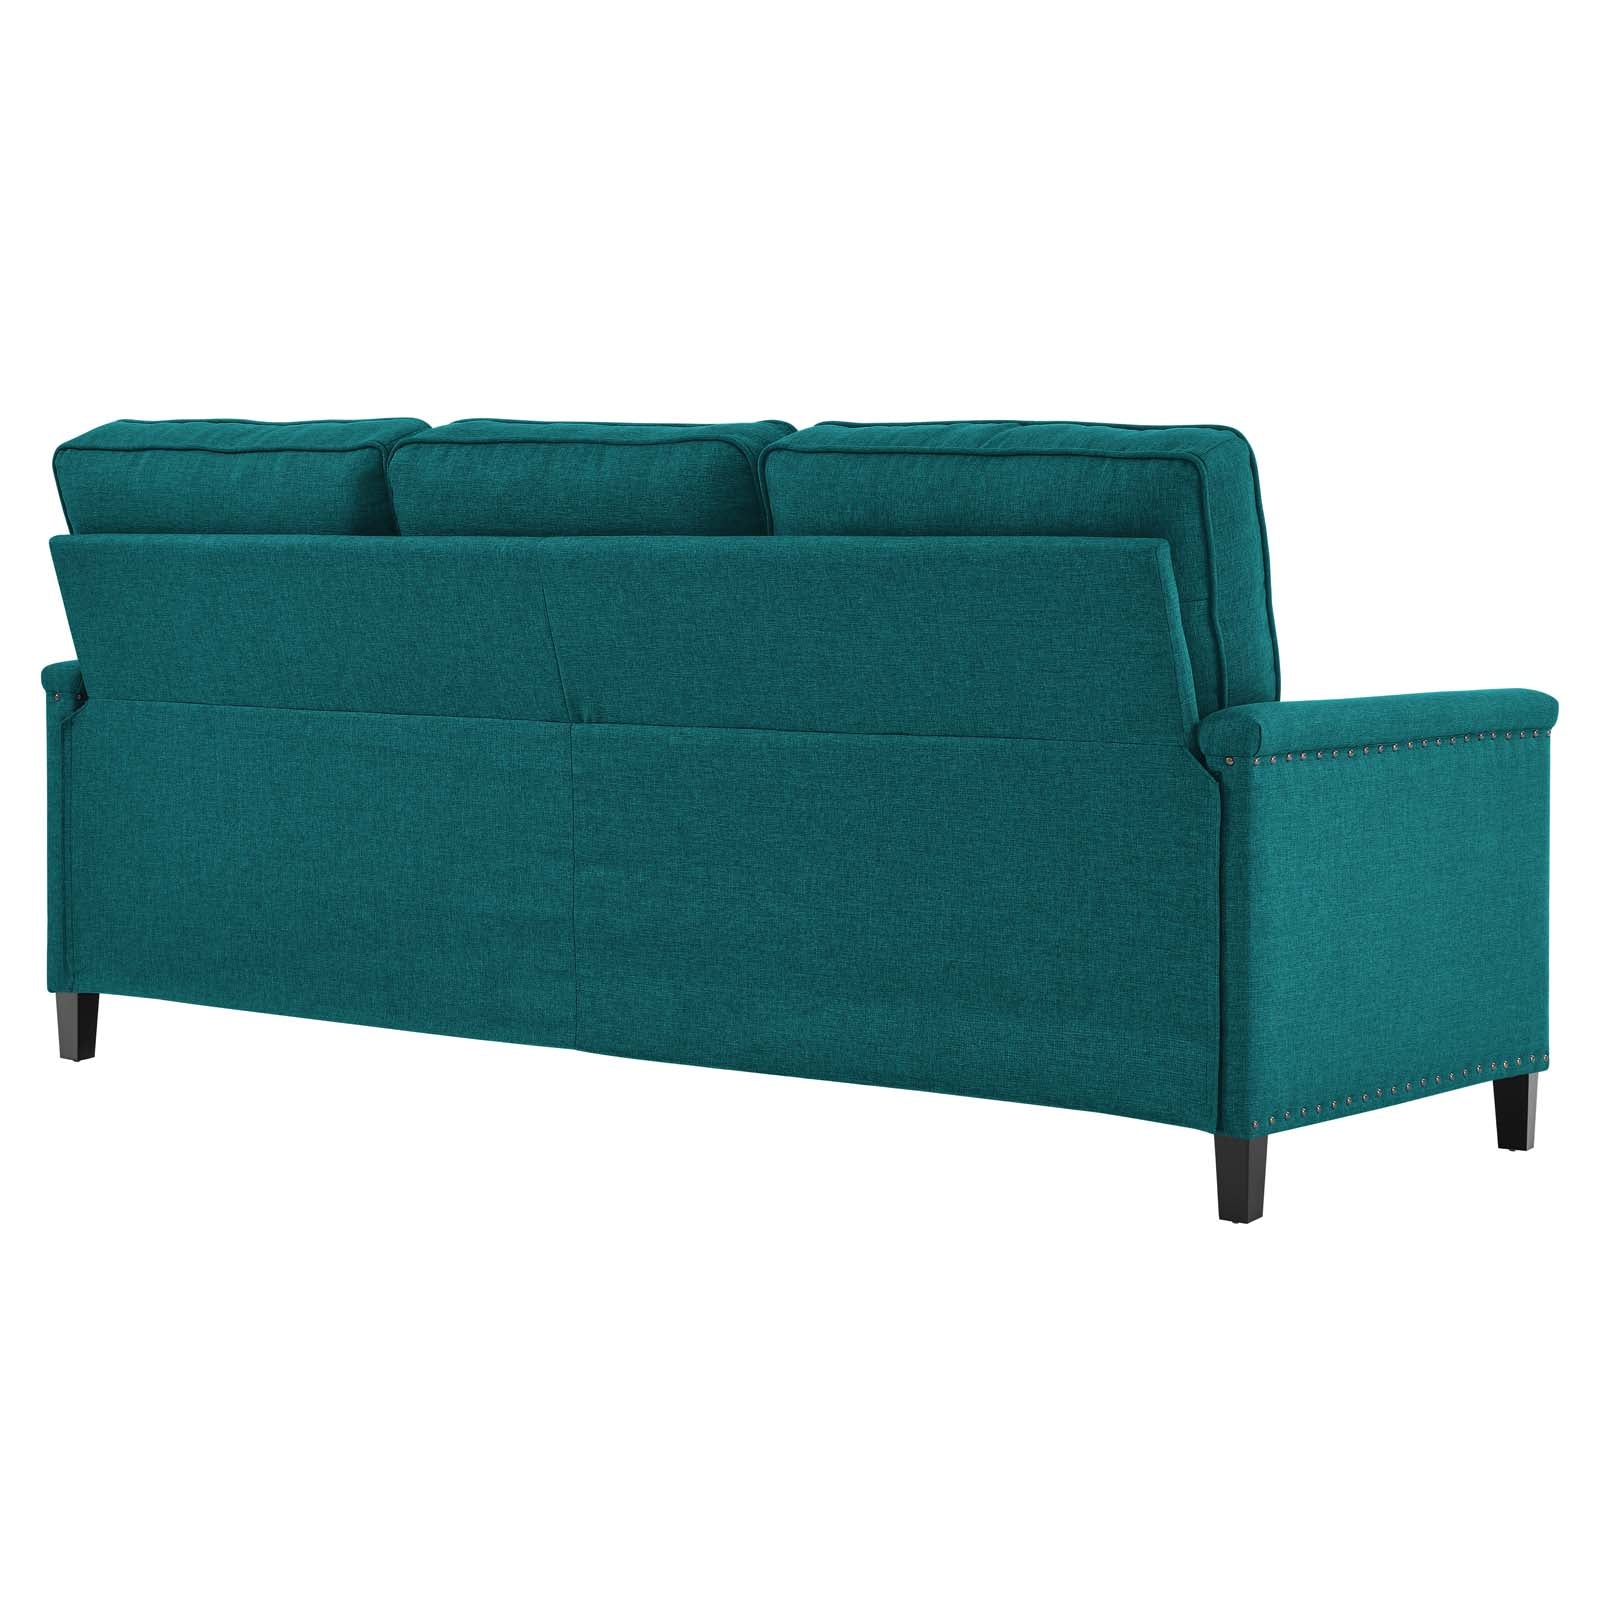 Modway Sectional Sofas - Ashton Upholstered Fabric Sectional Sofa Teal